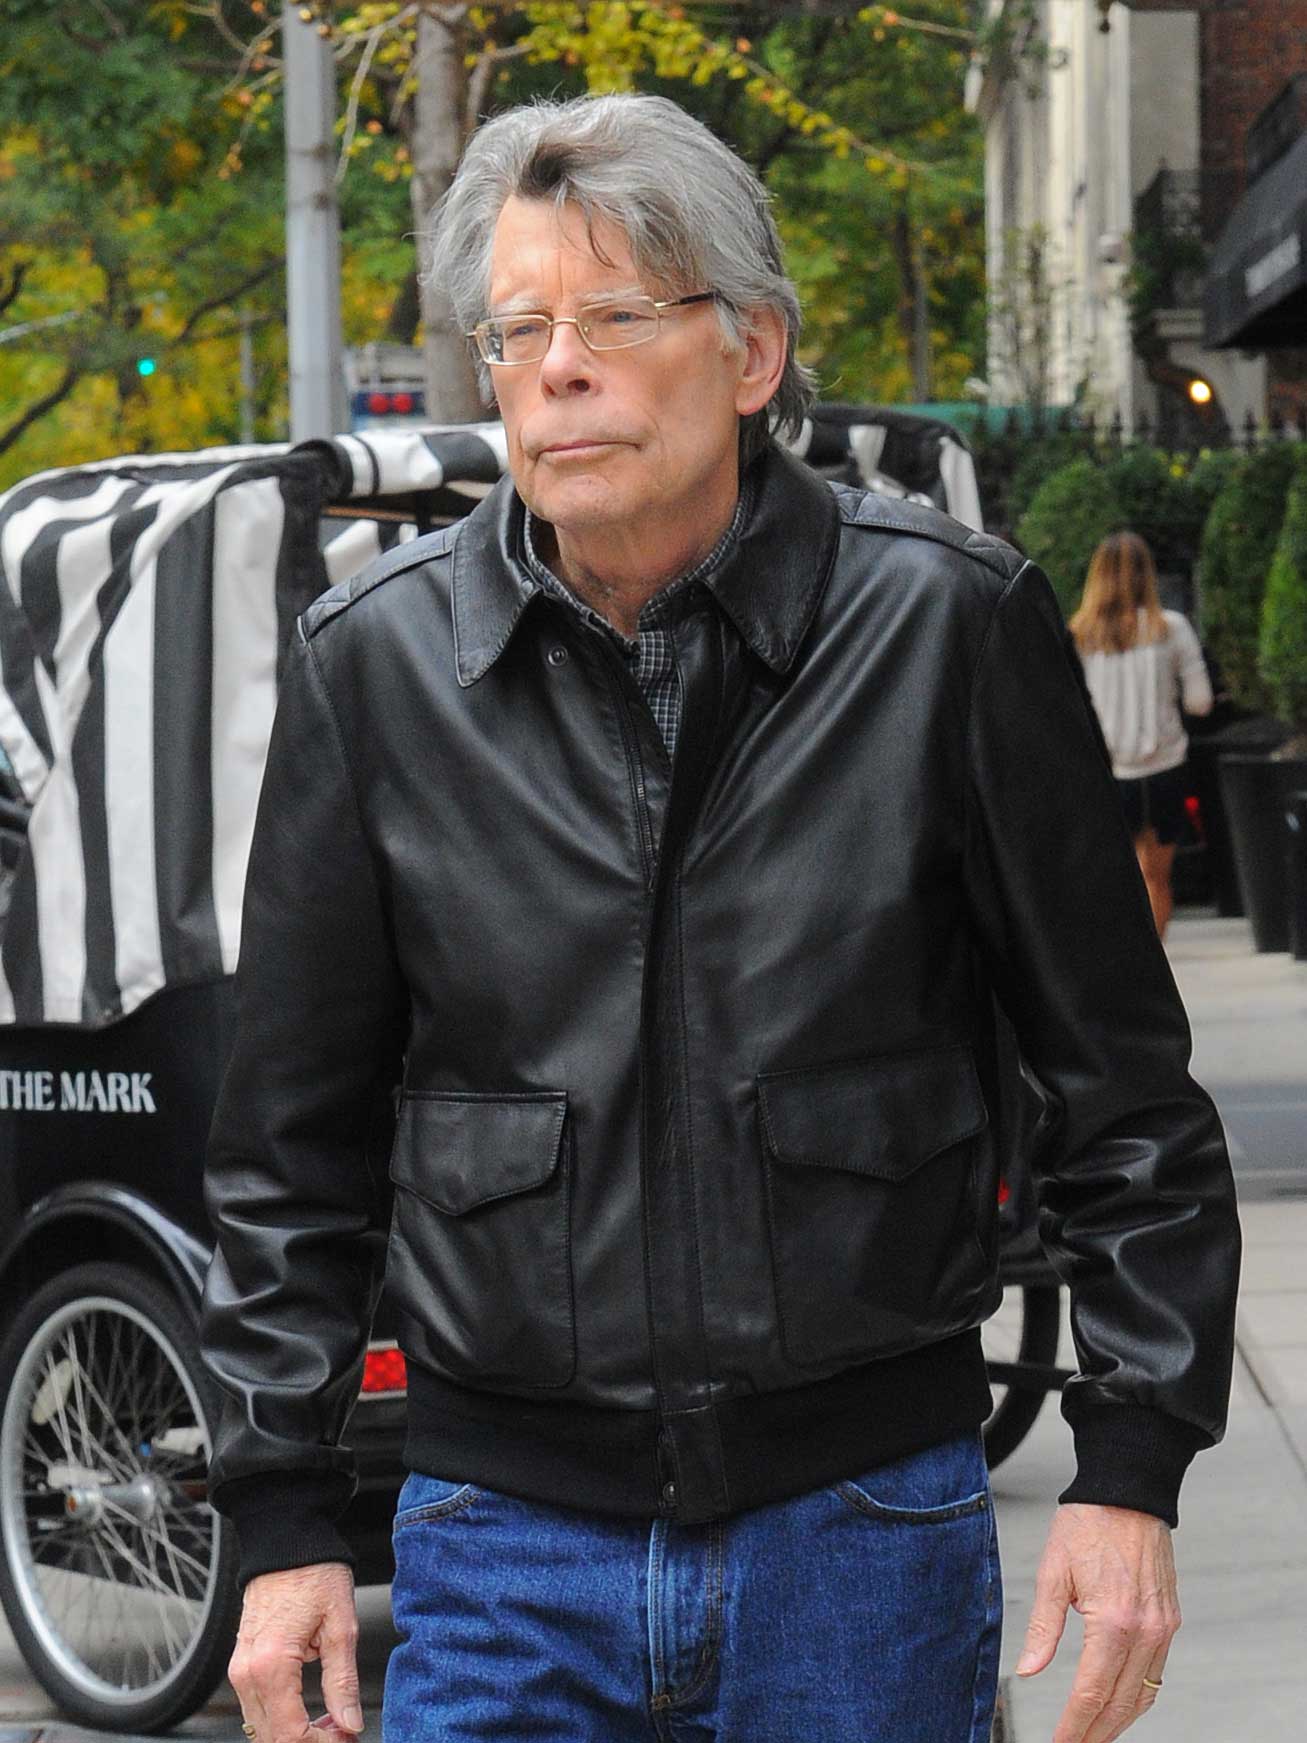 Stephen King owns a Harley, he also had a cameo role in Sons of Anarchy—he rode a red Road Glide.